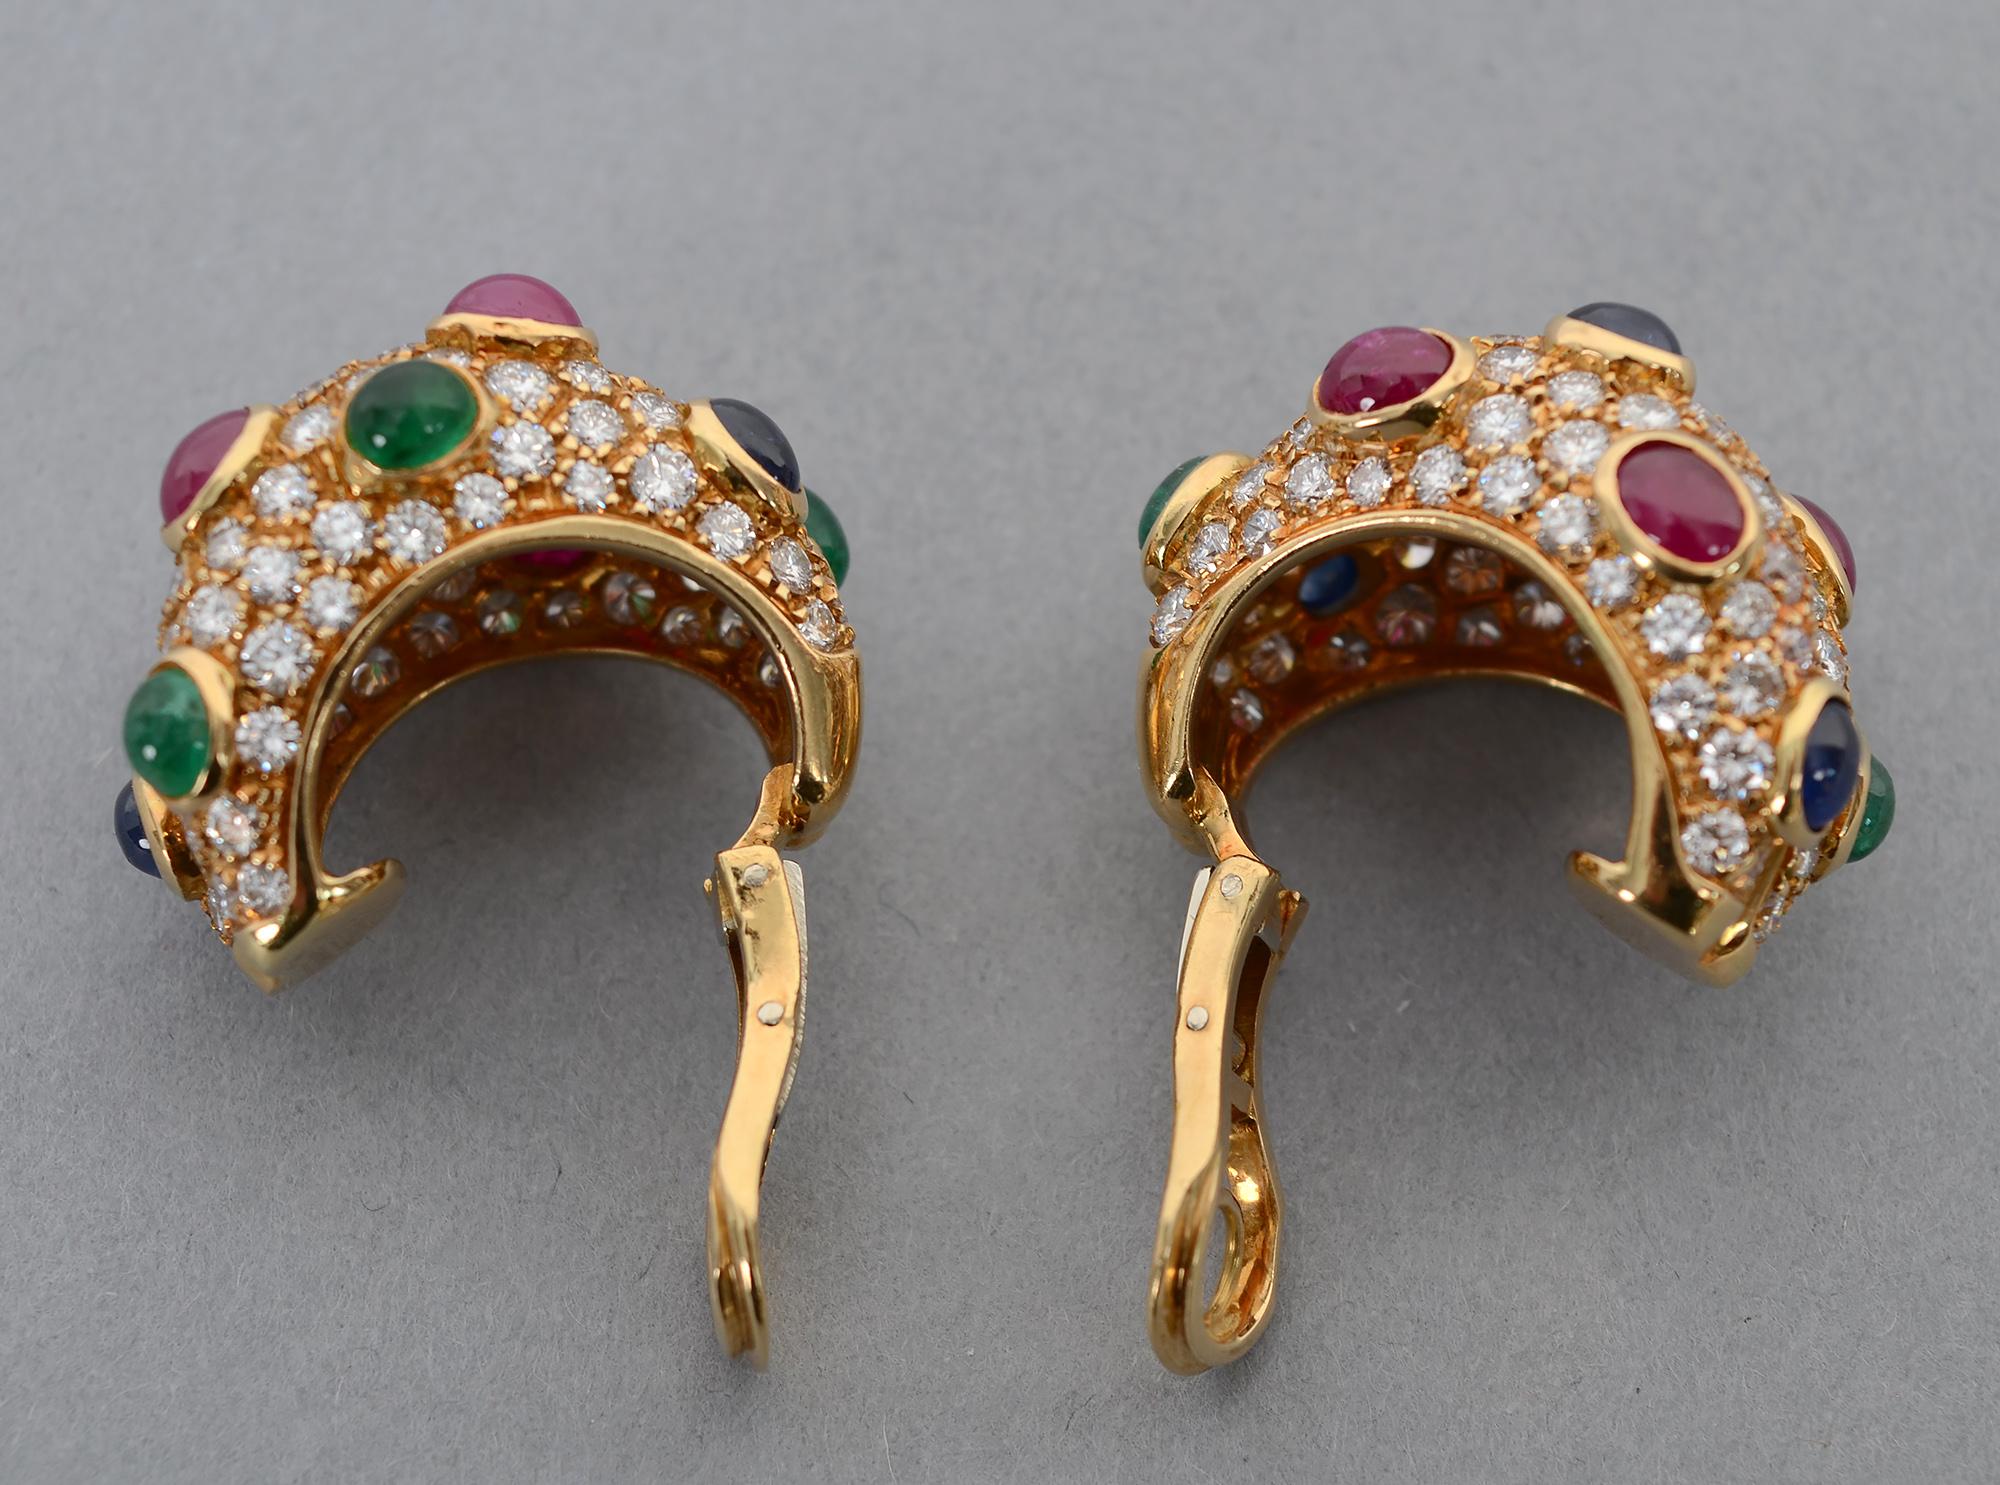 Diamond Half Hoop Earrings with Rubies, Sapphires and Emeralds In Excellent Condition For Sale In Darnestown, MD